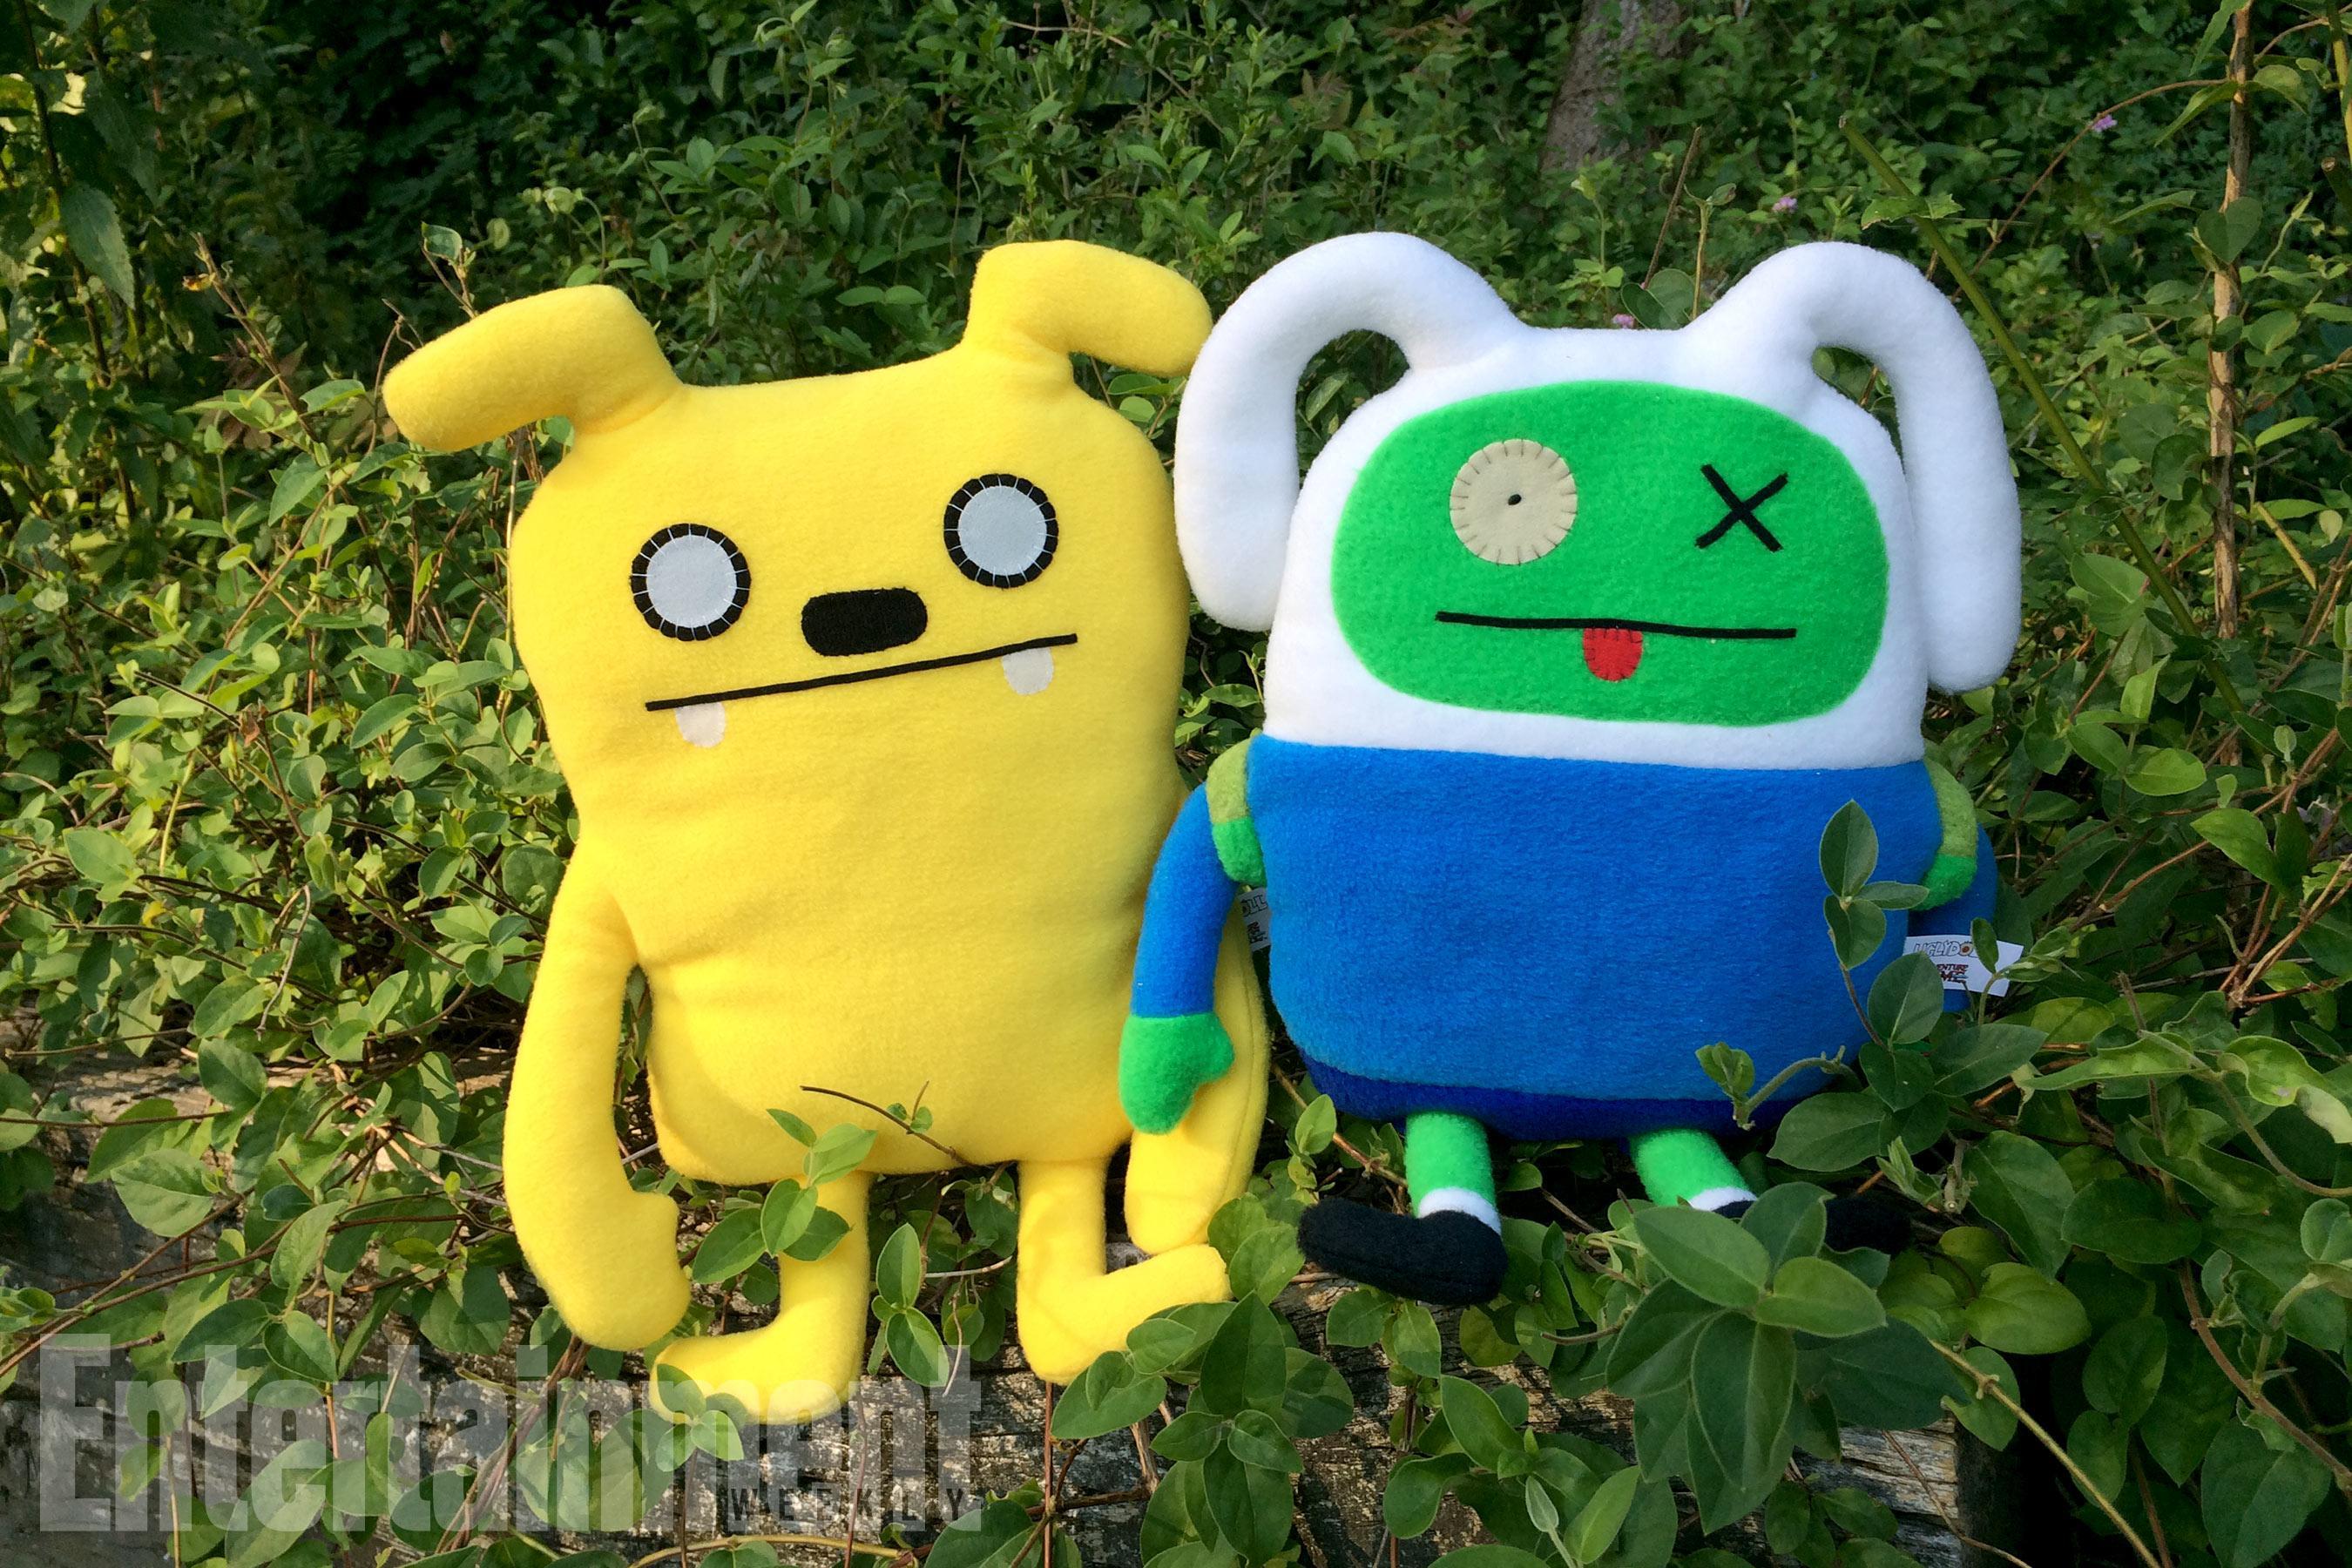 Adventure Time Uglydolls are coming to SDCC this year